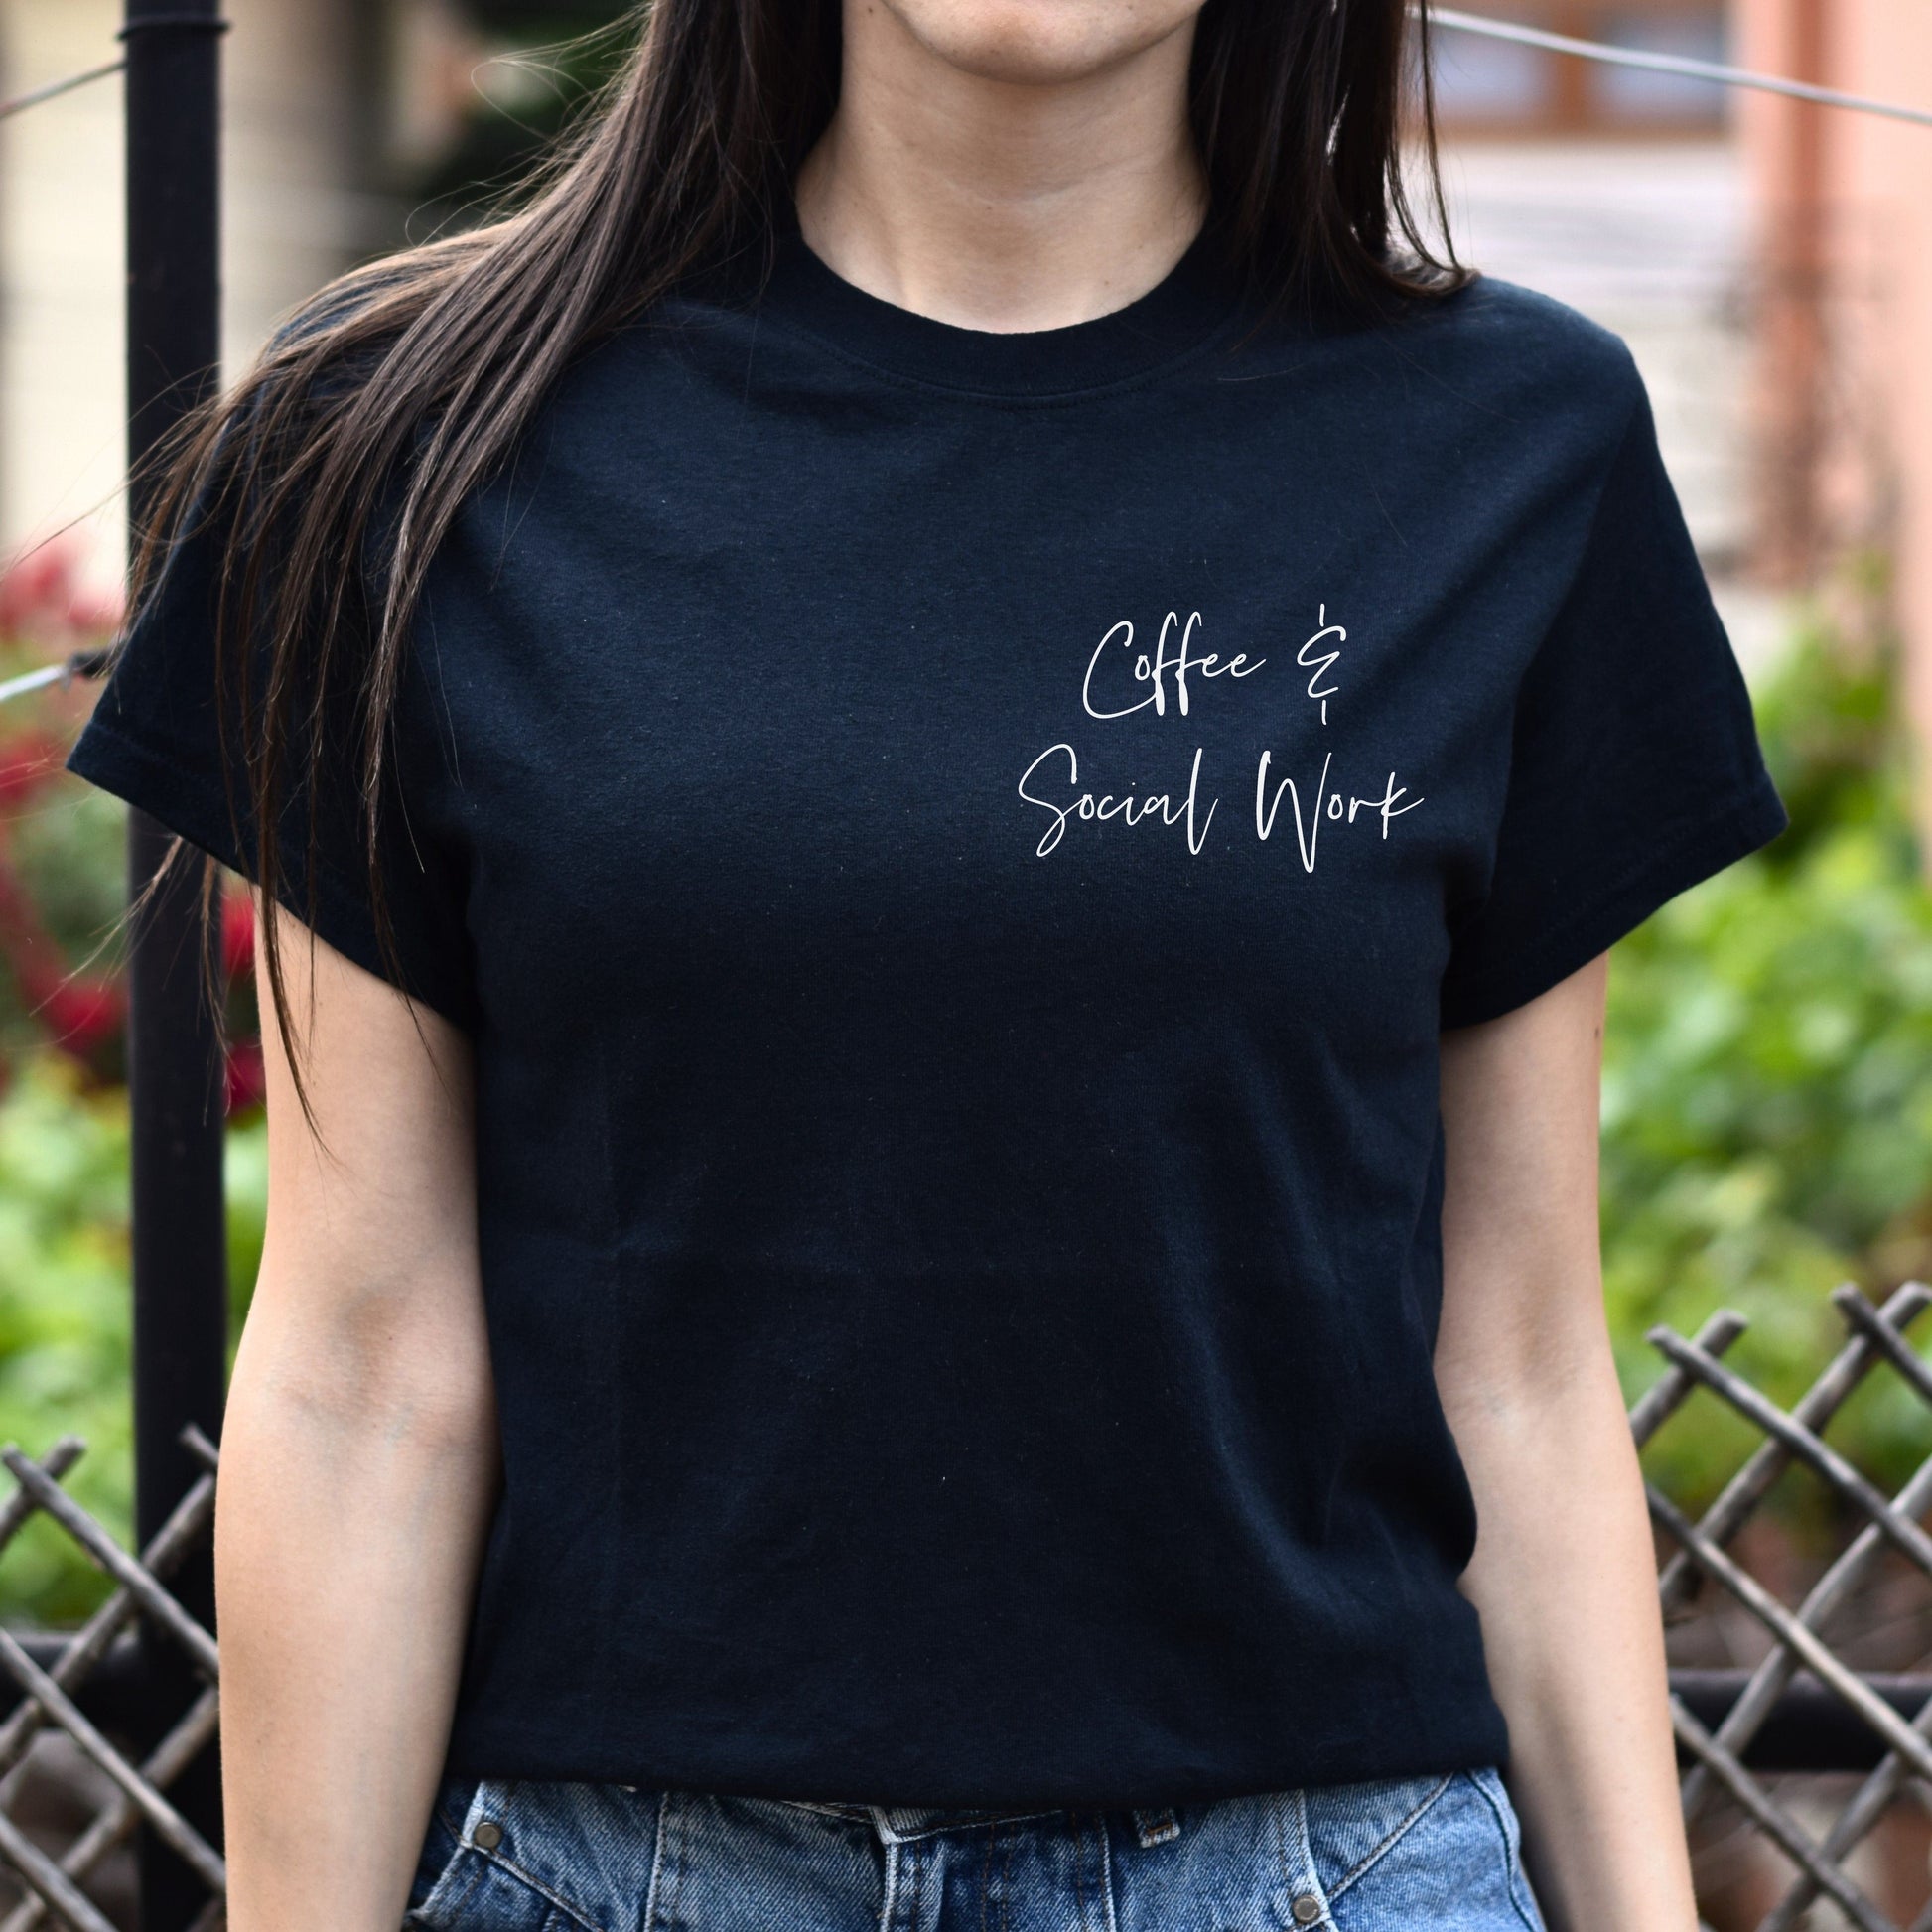 Coffee and Social work pocket Unisex T-shirt social worker tee Black Navy Dark Heather-Family-Gift-Planet